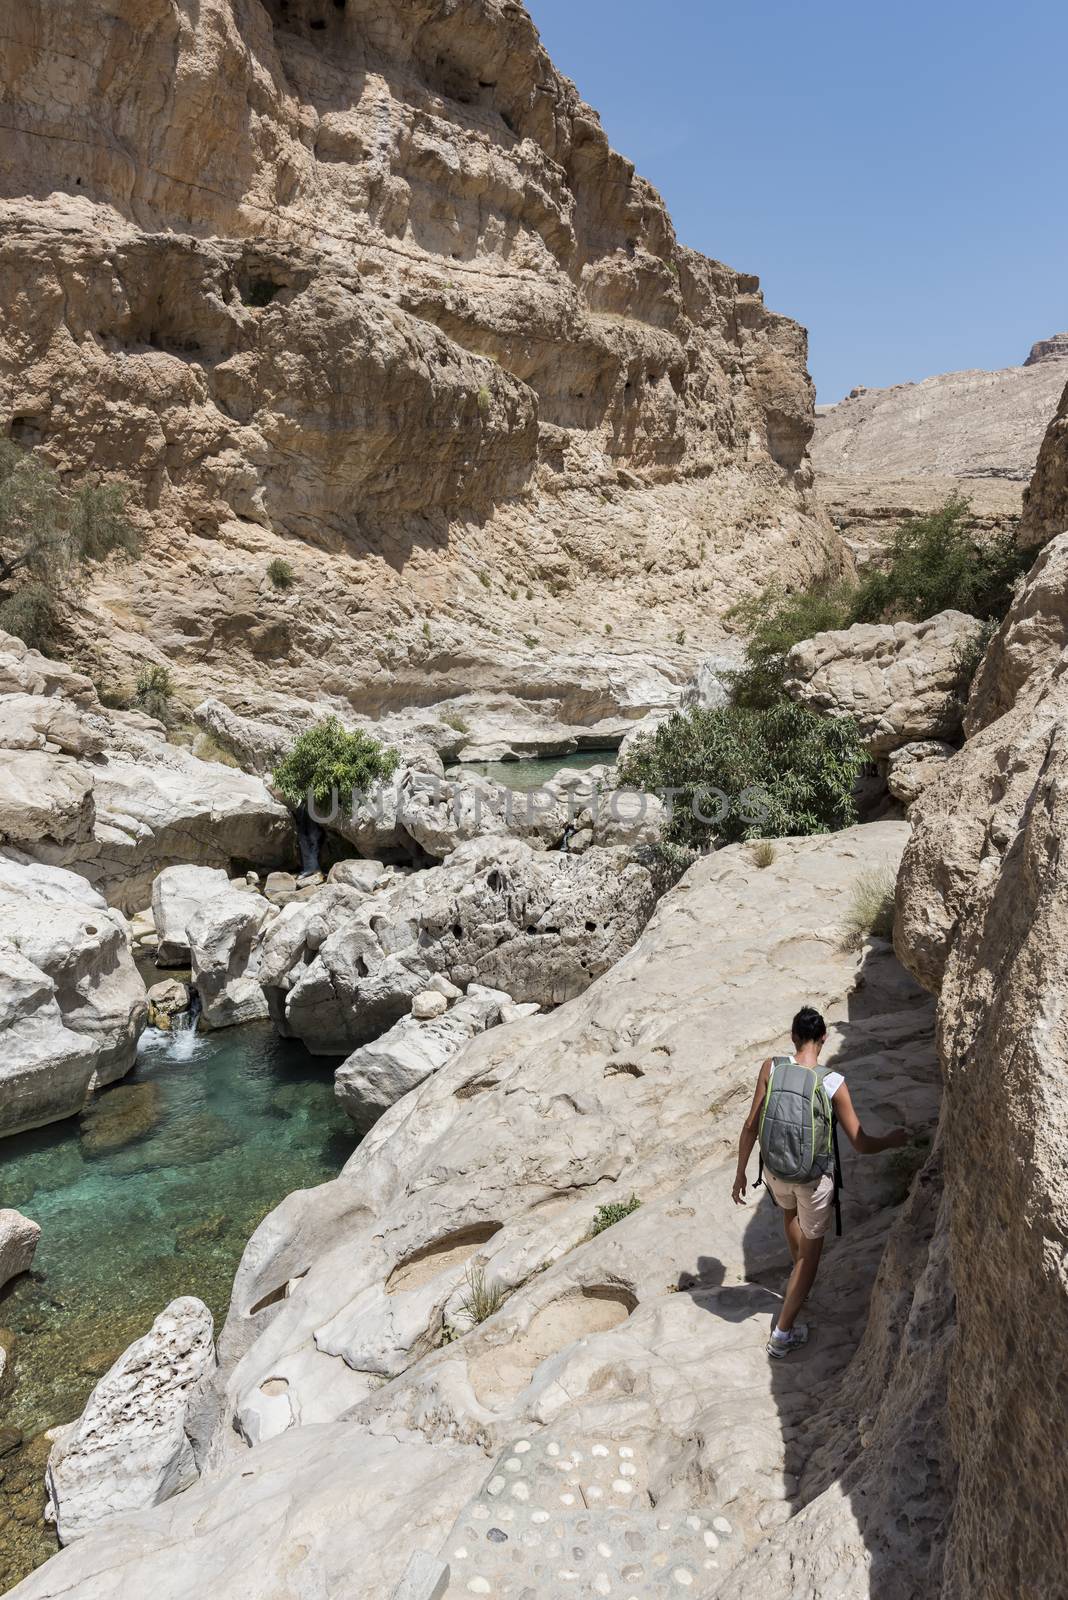 Woman in the 40s trekking near the river and pool in the canyon of Wadi Bani Khalid, in Oman, Middle East